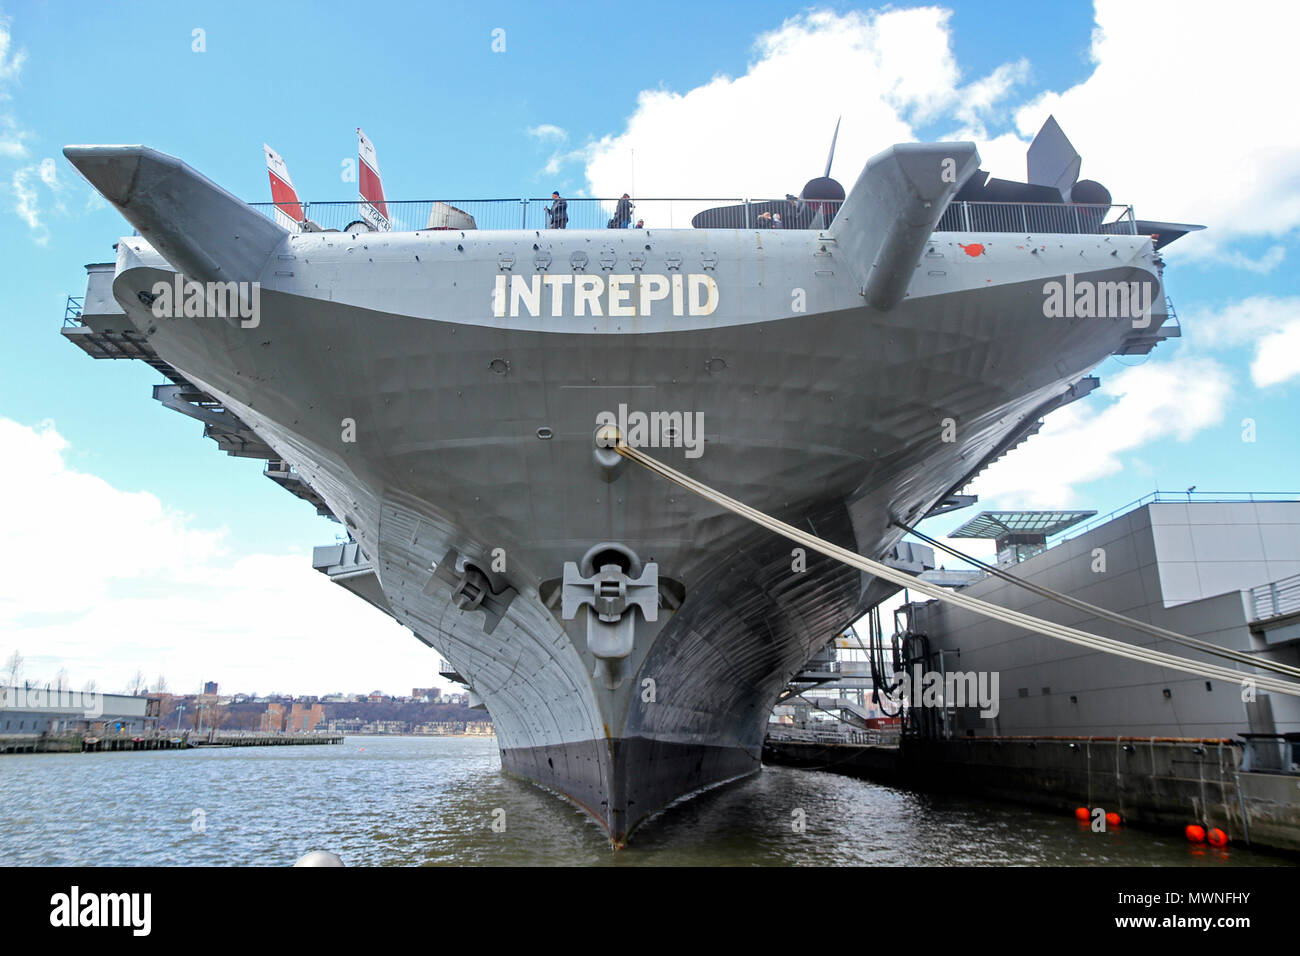 The aircraft carrier USS Intrepid, part of the Intrepid Sea, Air & Space Museum, Pier 86, Manhattan, New York City Stock Photo